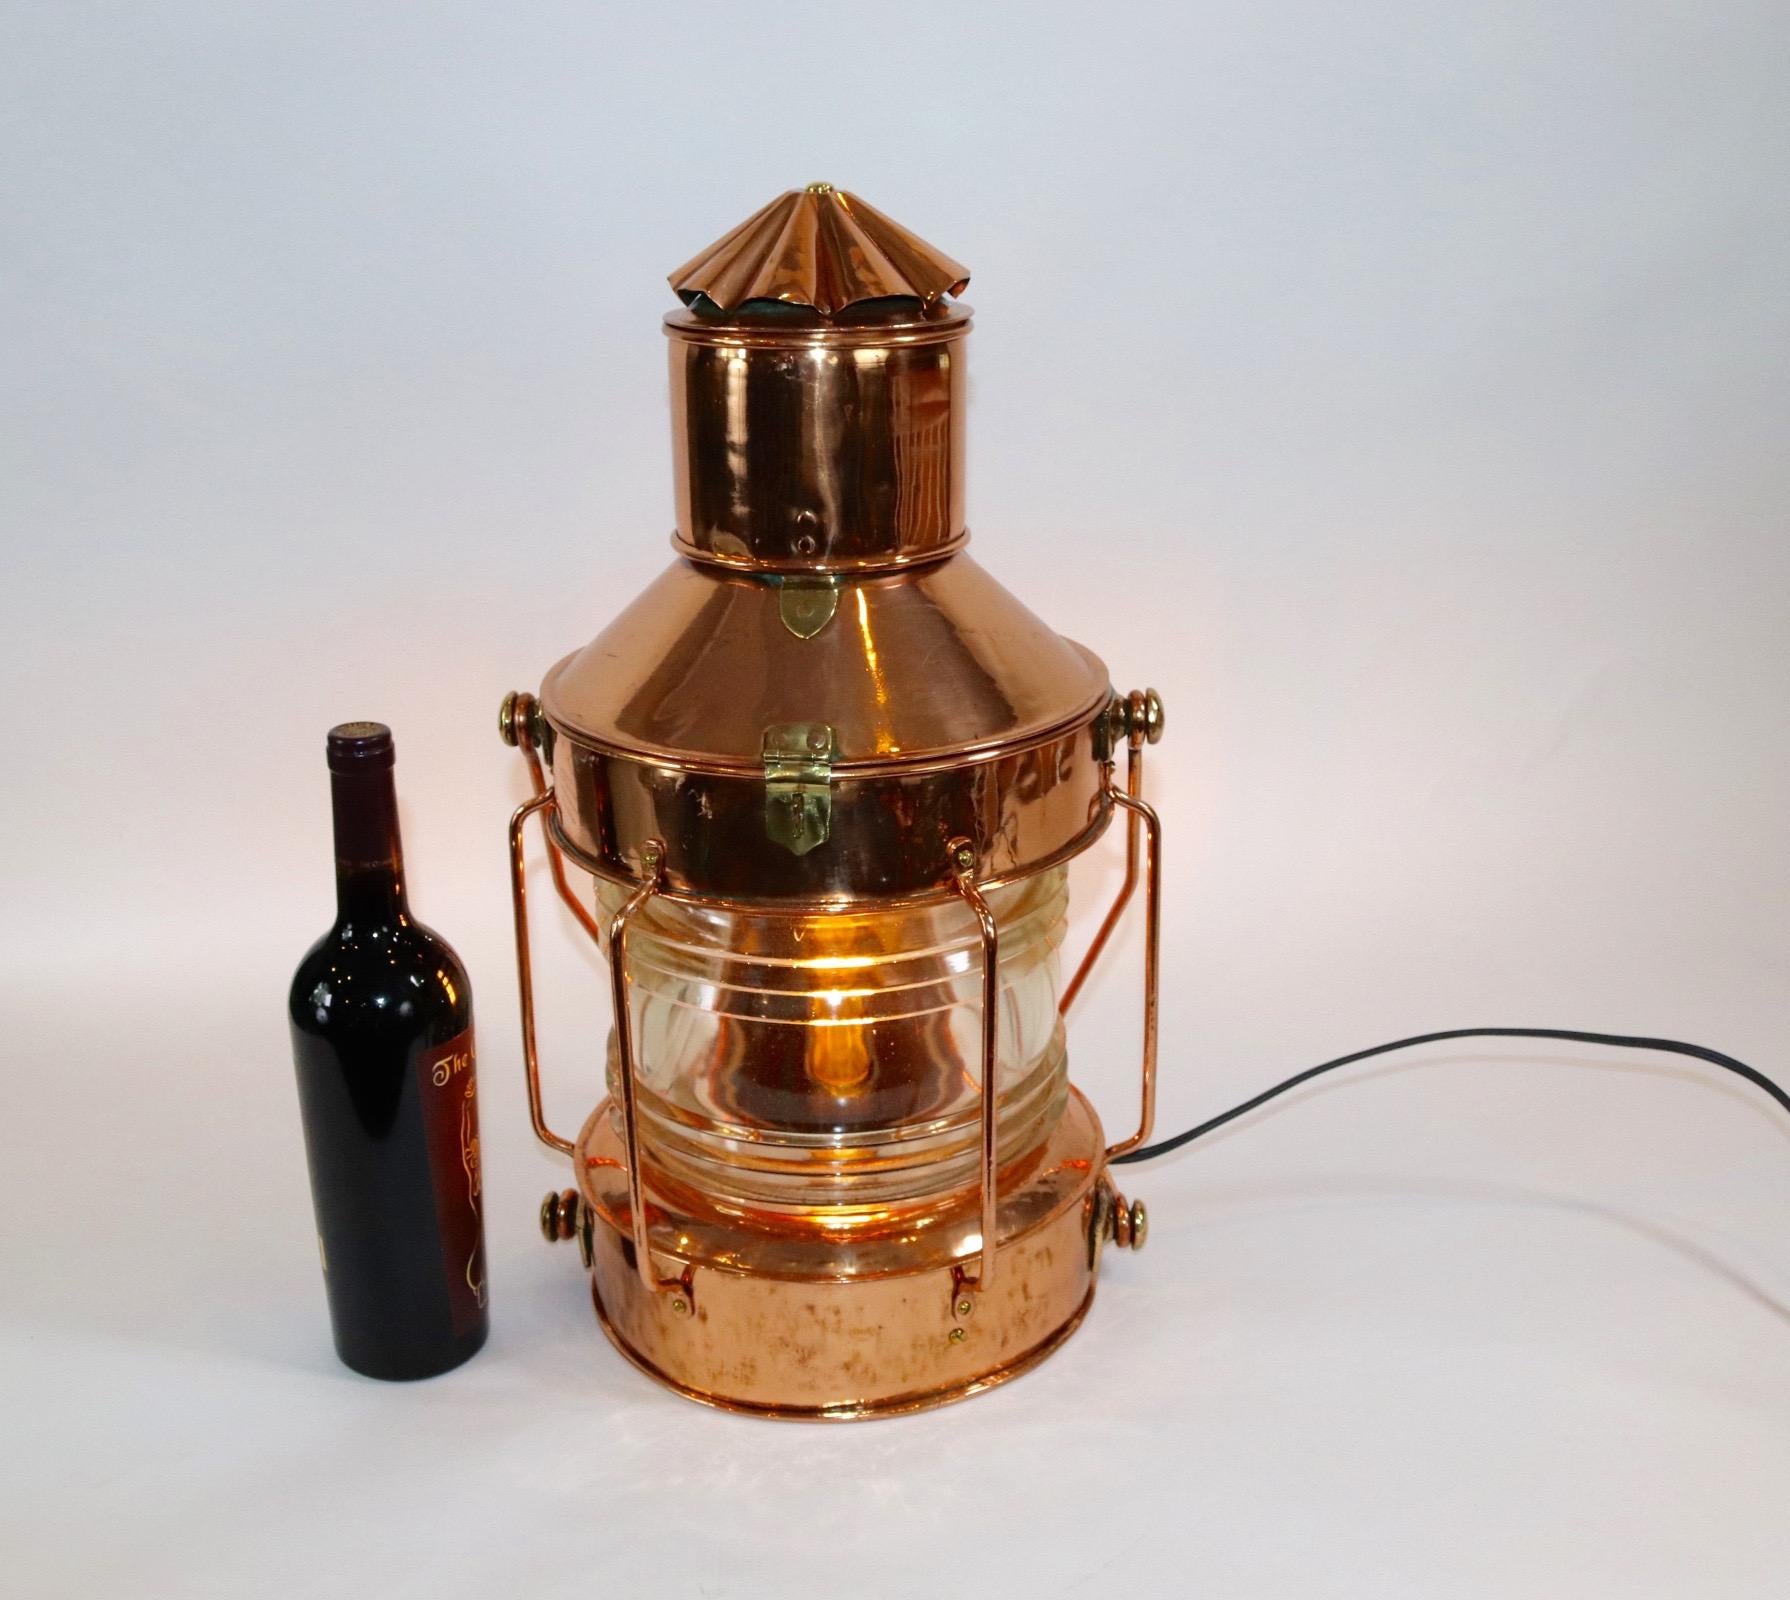 Highly polished and lacquered ships anchor lantern with a thick Fresnel lens [Please see the picture showing a piece of missing lens). Lantern has been electrified for home use. Weight is 19 pounds.